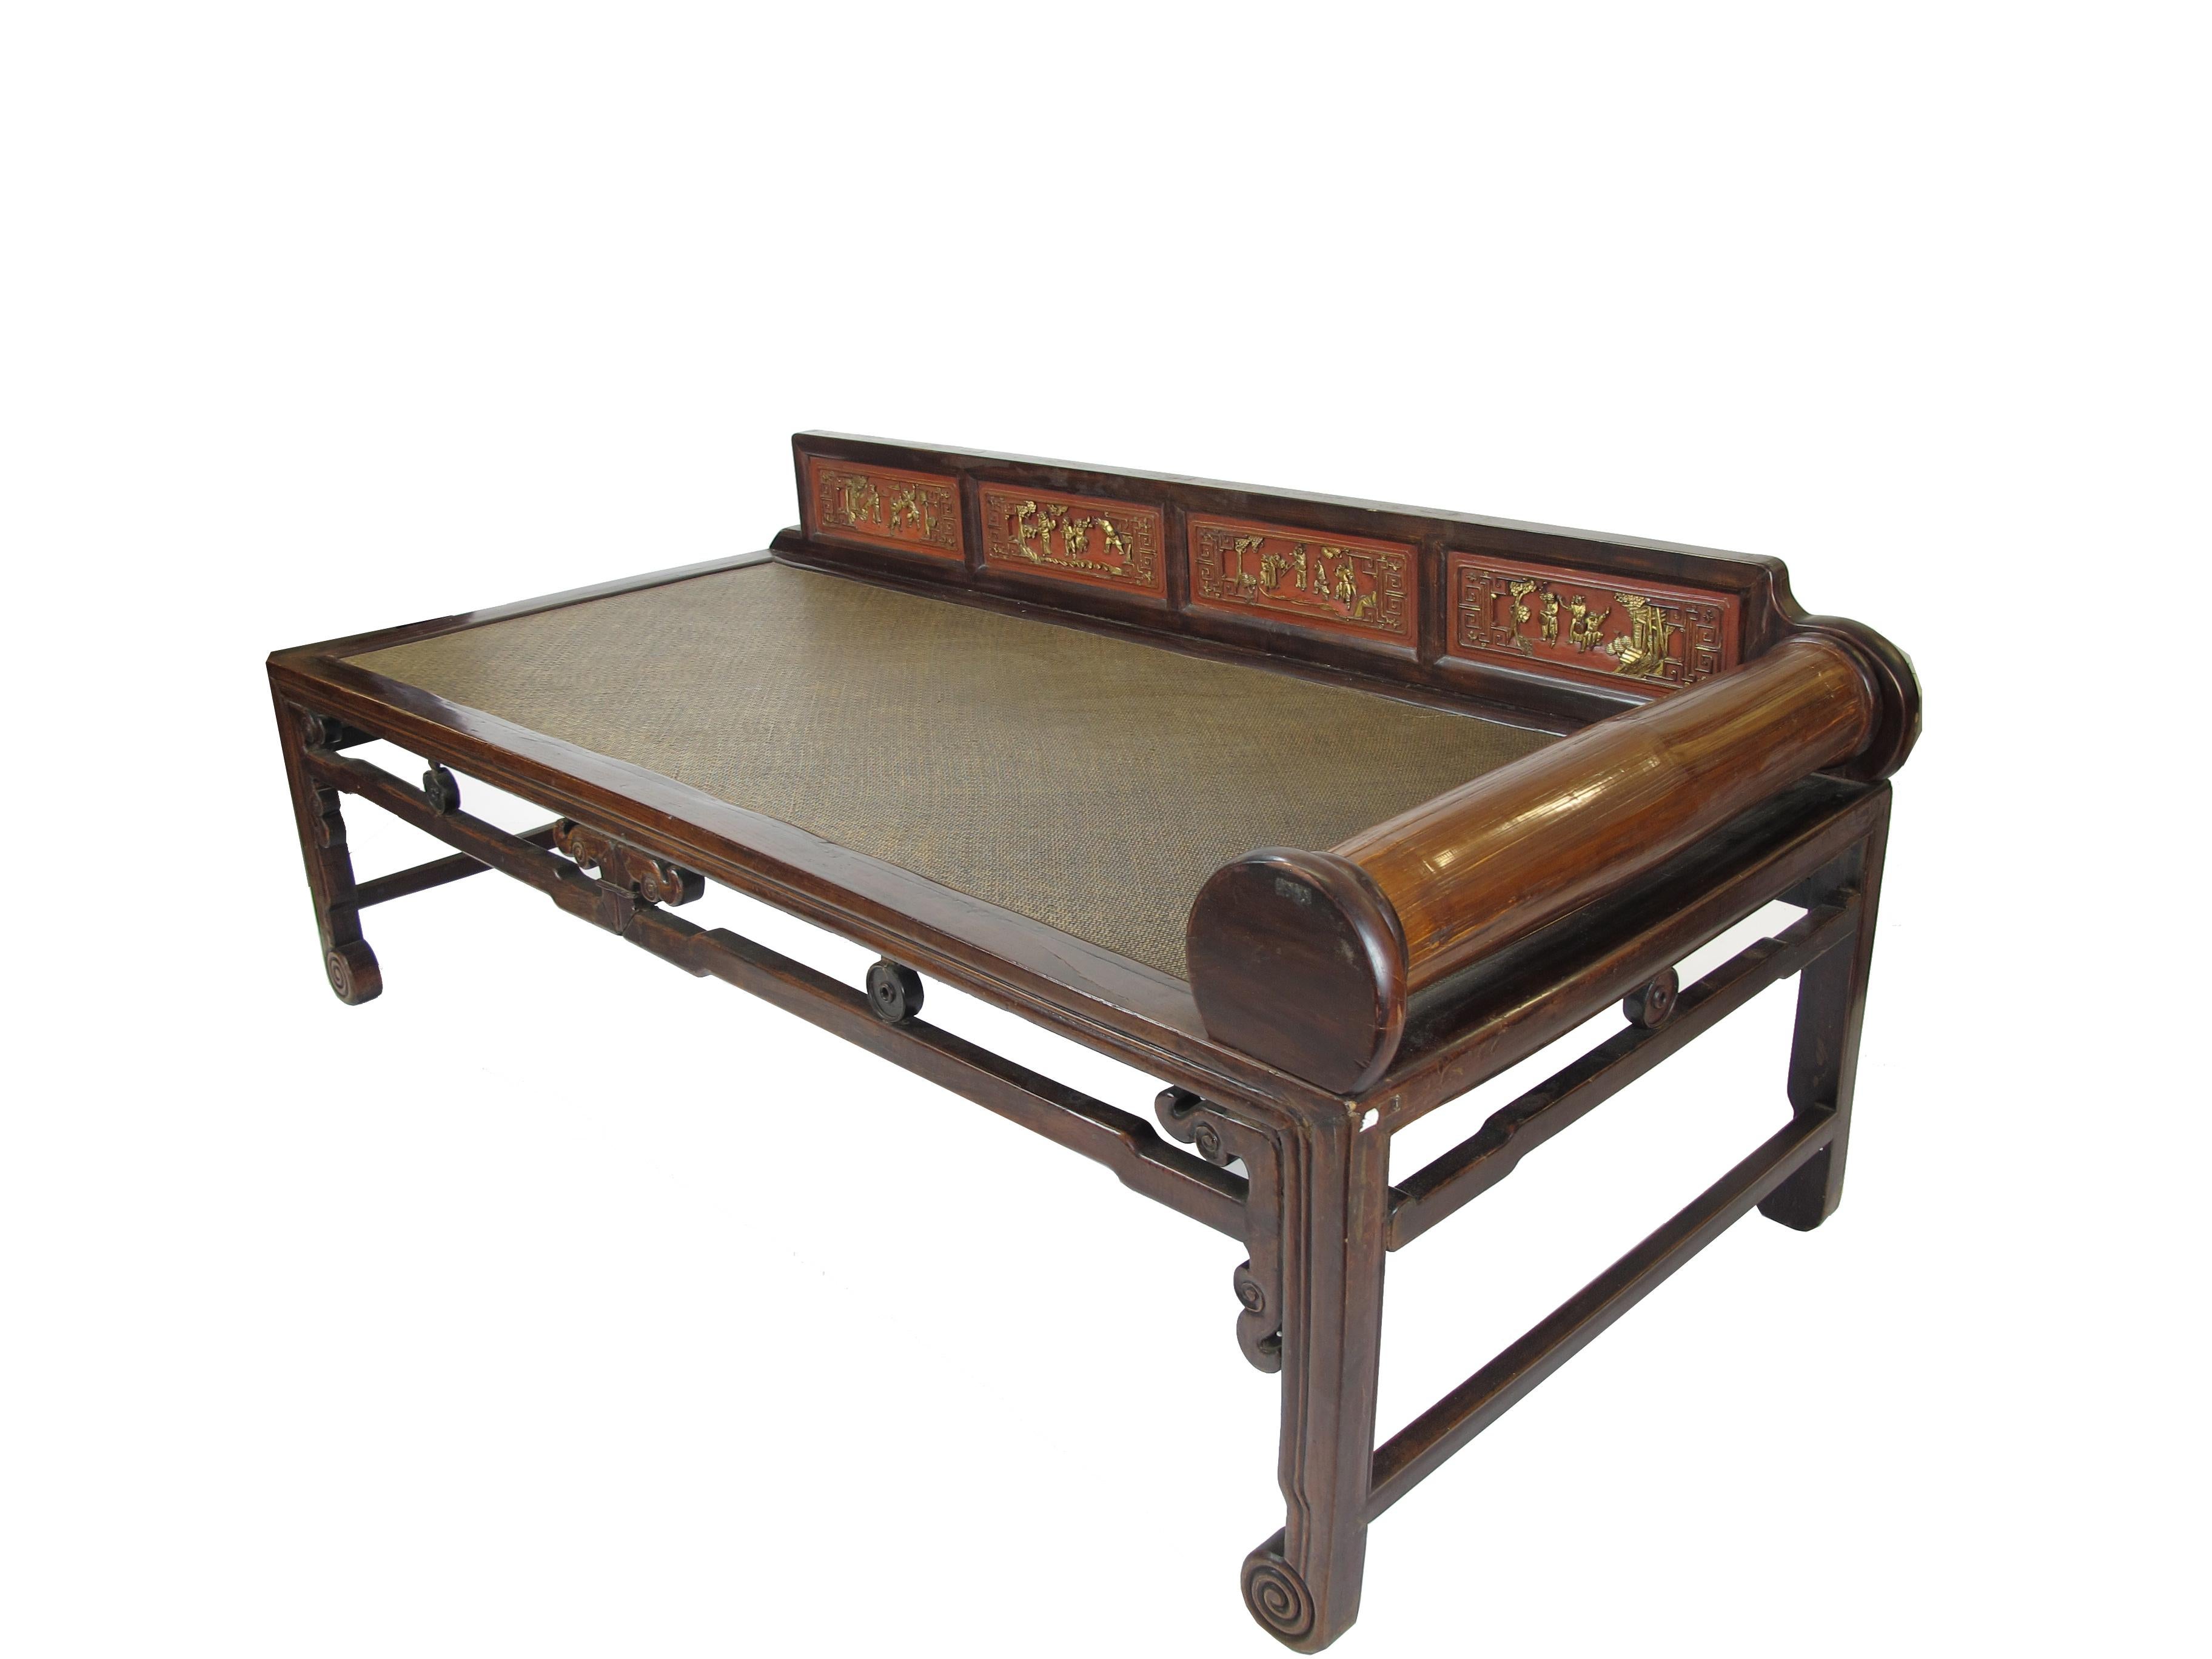 This pretty antique Chinese daybed is from southern part of China. It is light weighted as the top of the bed is made of rattan only. With slim legs, latticework frame, hand pained low rail, and head set, this lovely daybed will be a lovely and